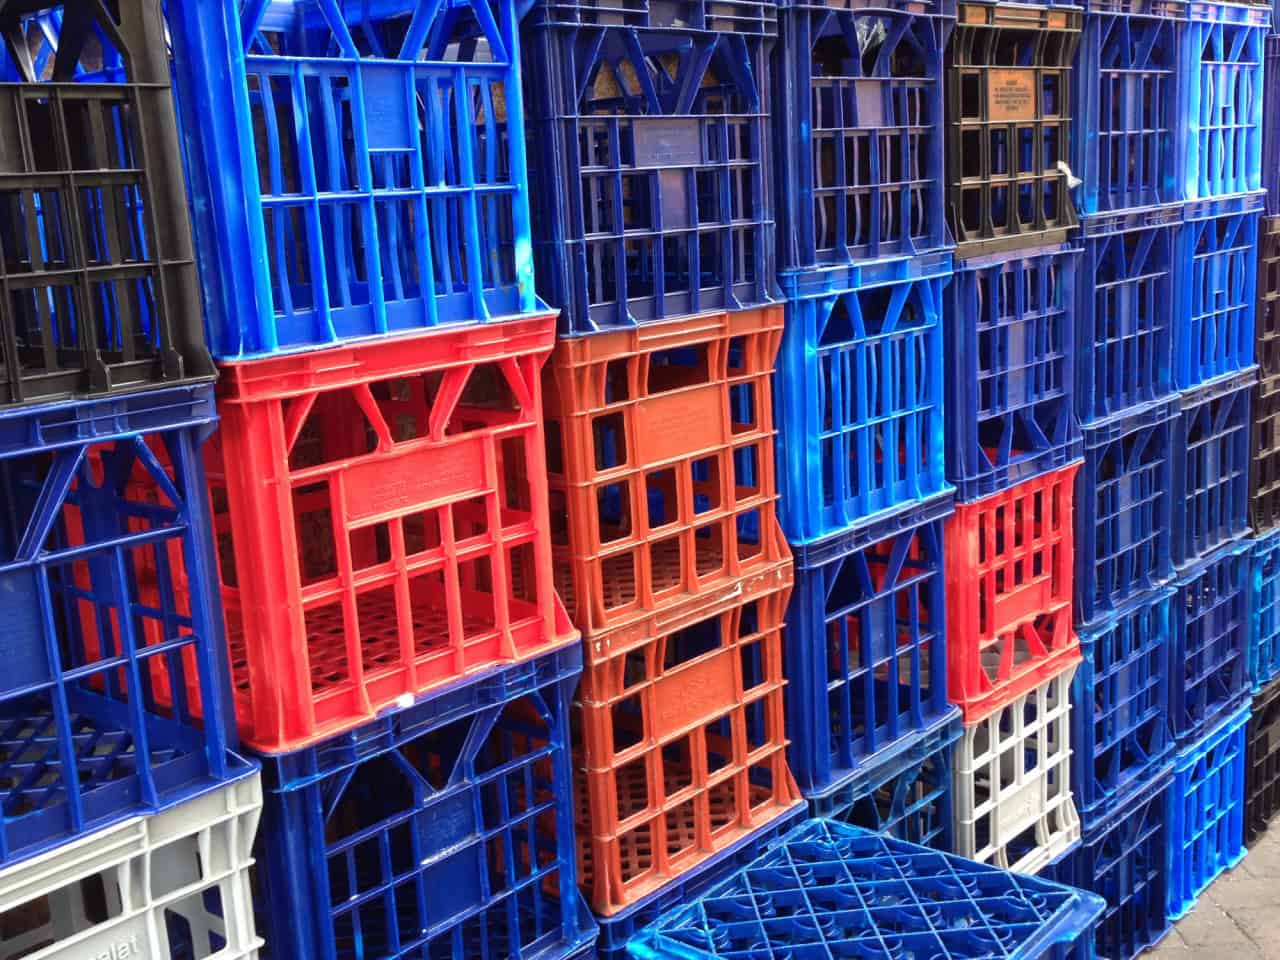 Wall of crates